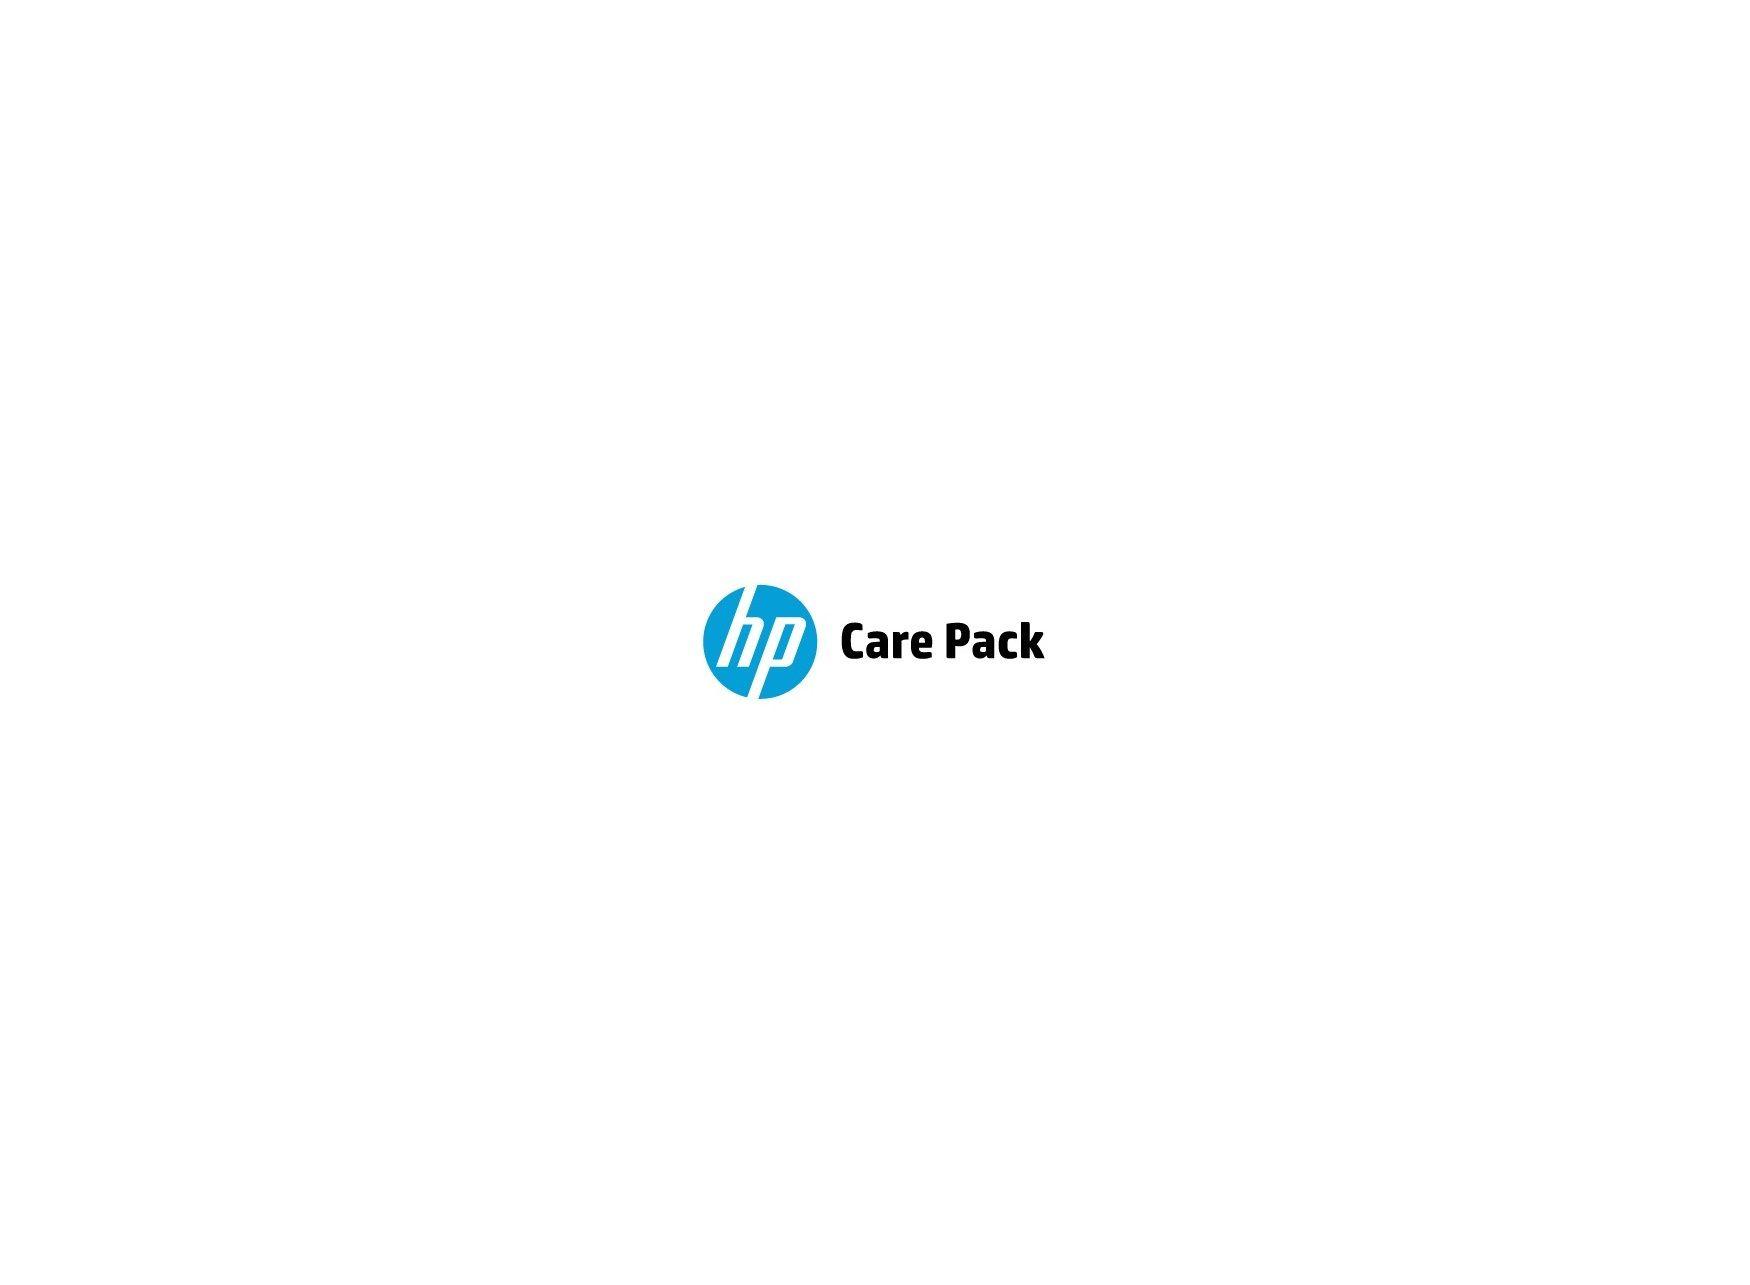 HP Services Logo - HP 2 Year Care Pack with standard exchange service - HP Store UK